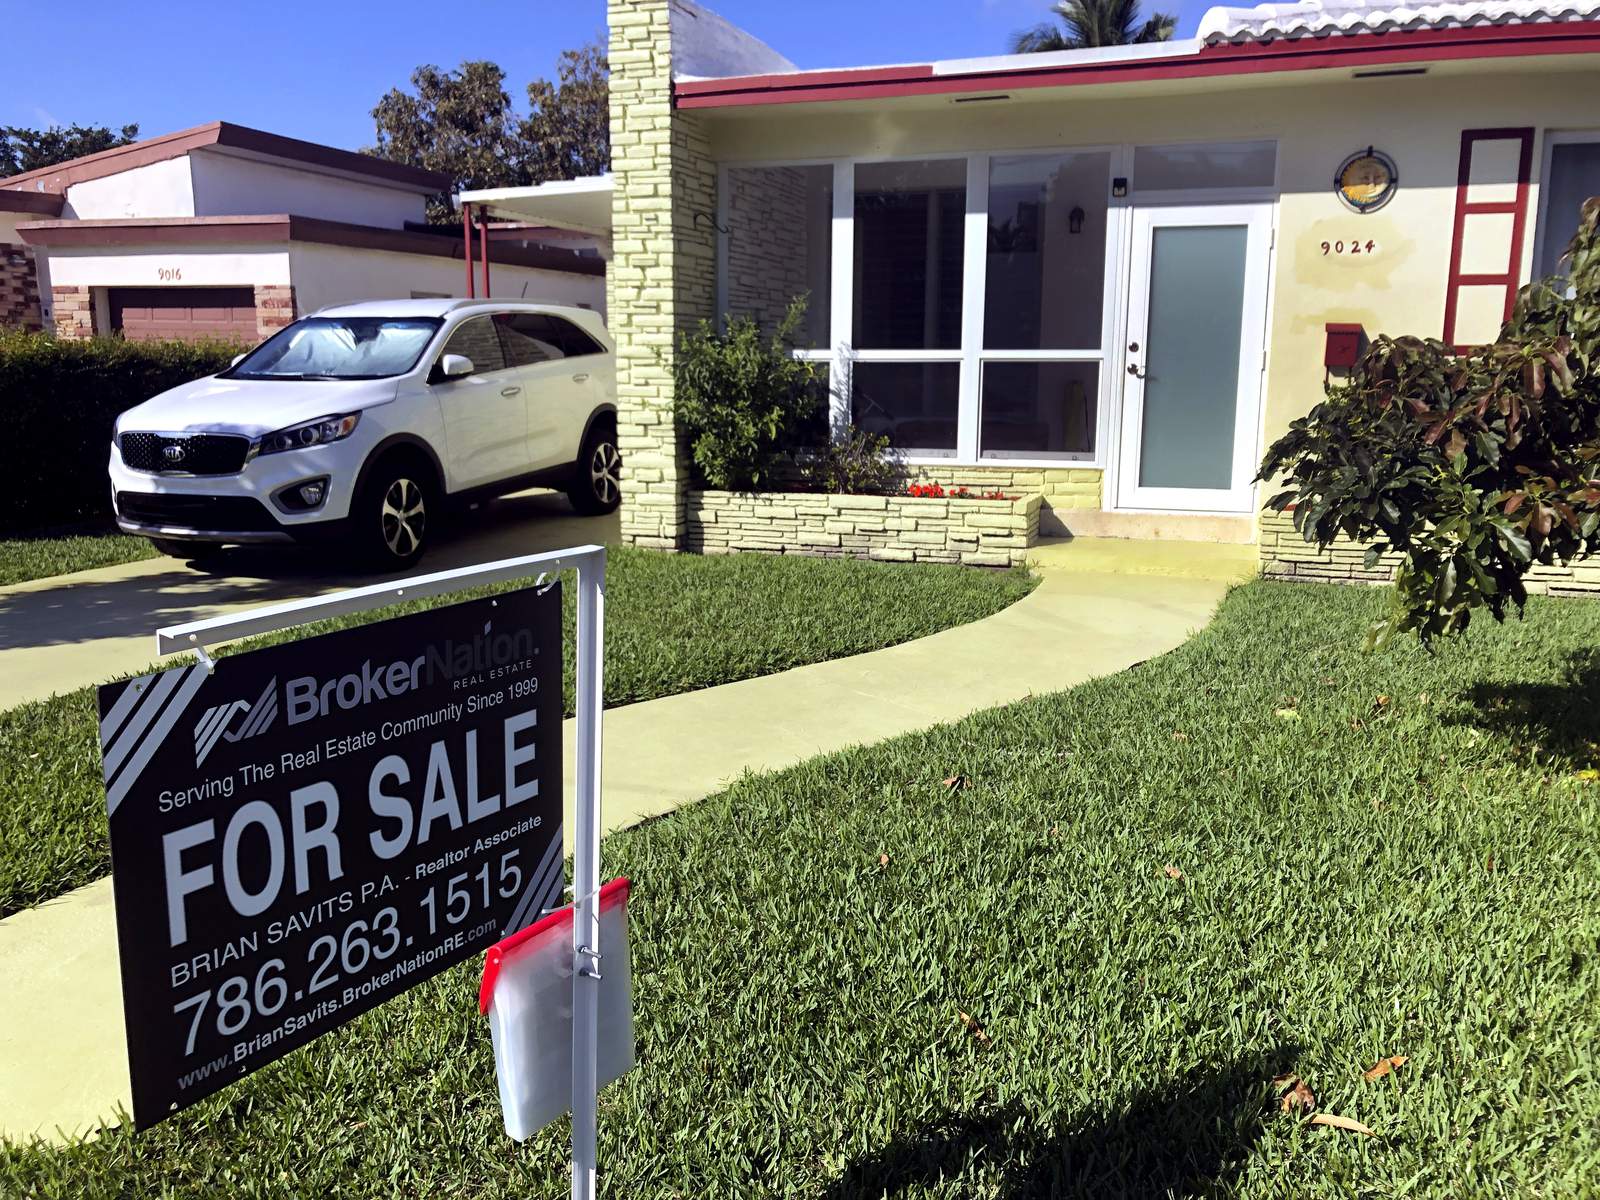 US home prices rise at fastest pace in more than 6 years